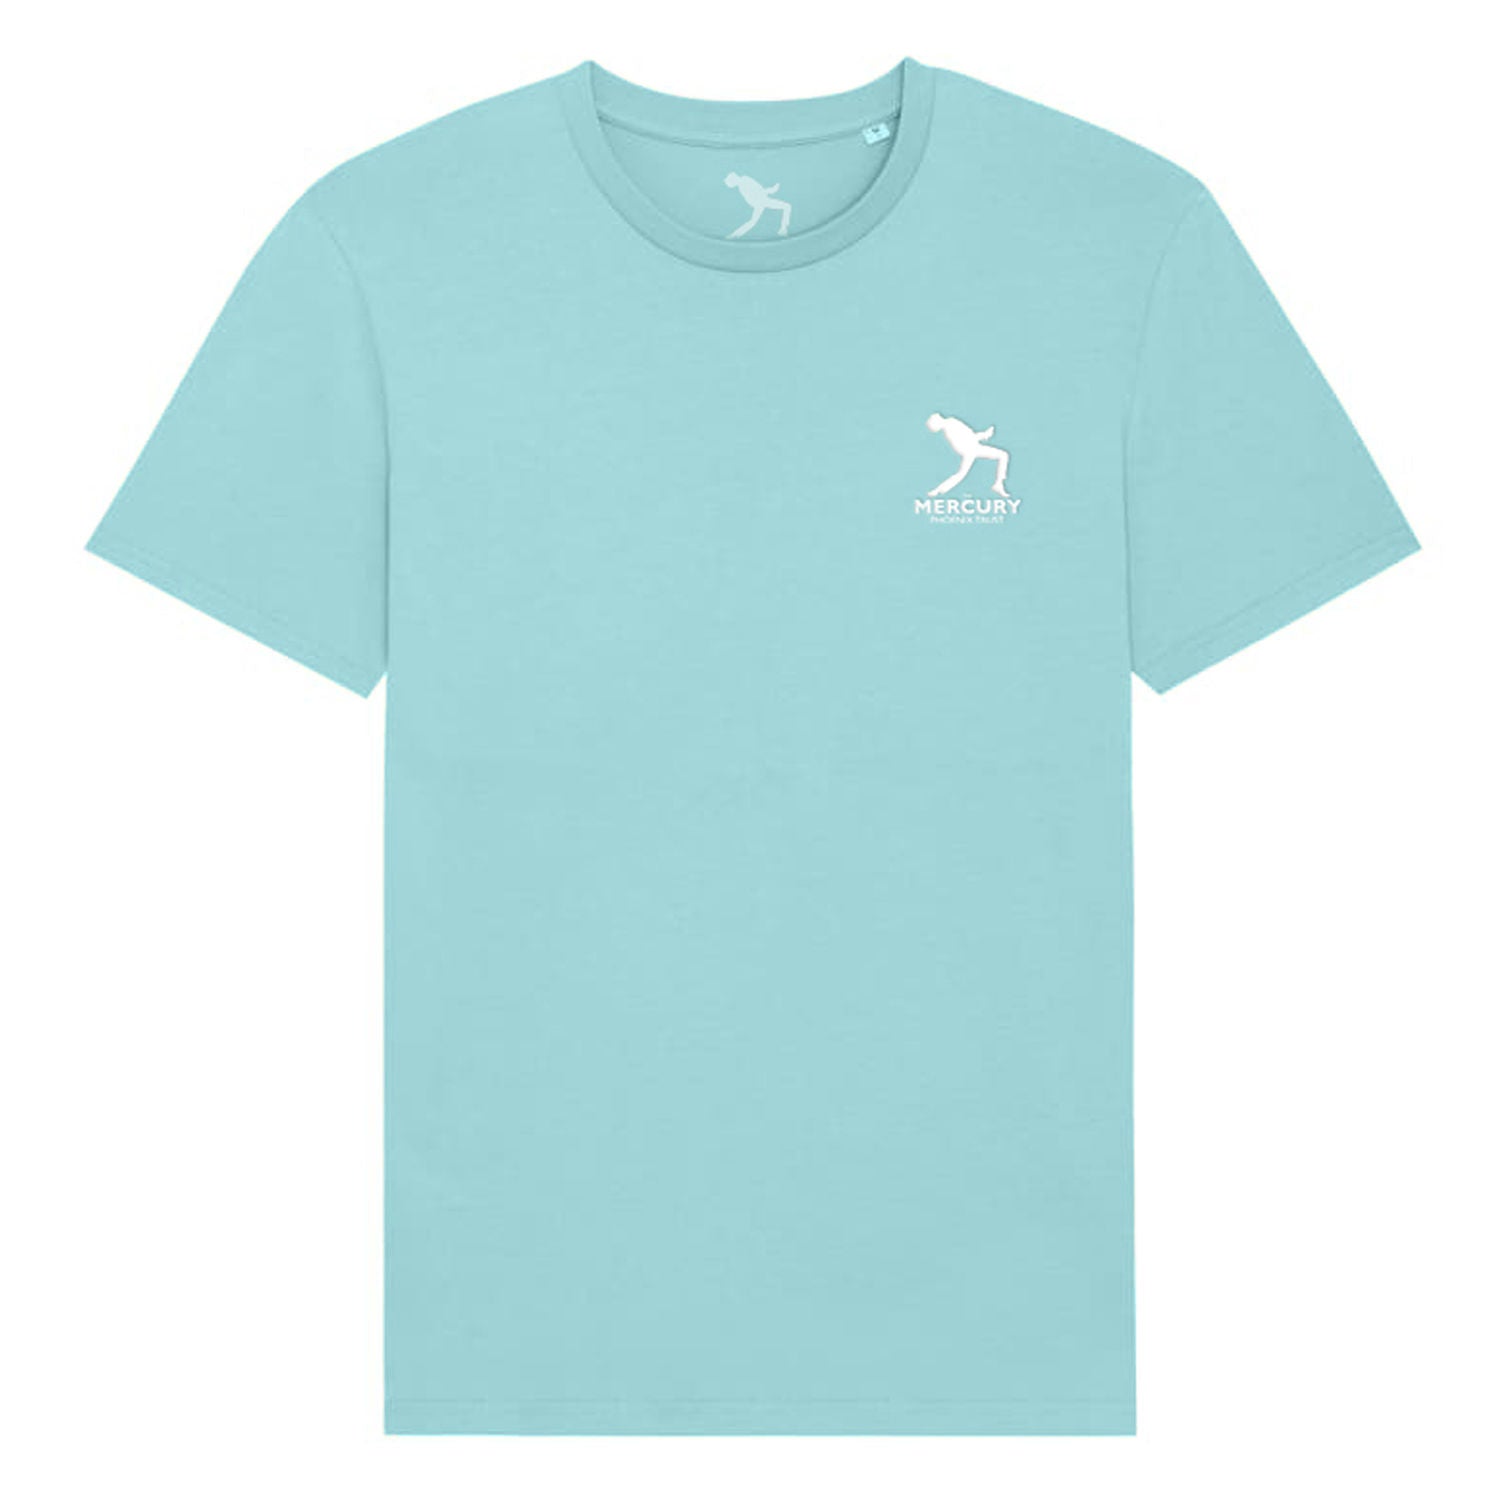 freddie for a day - Teal Summer Pastel Unisex T-Shirt